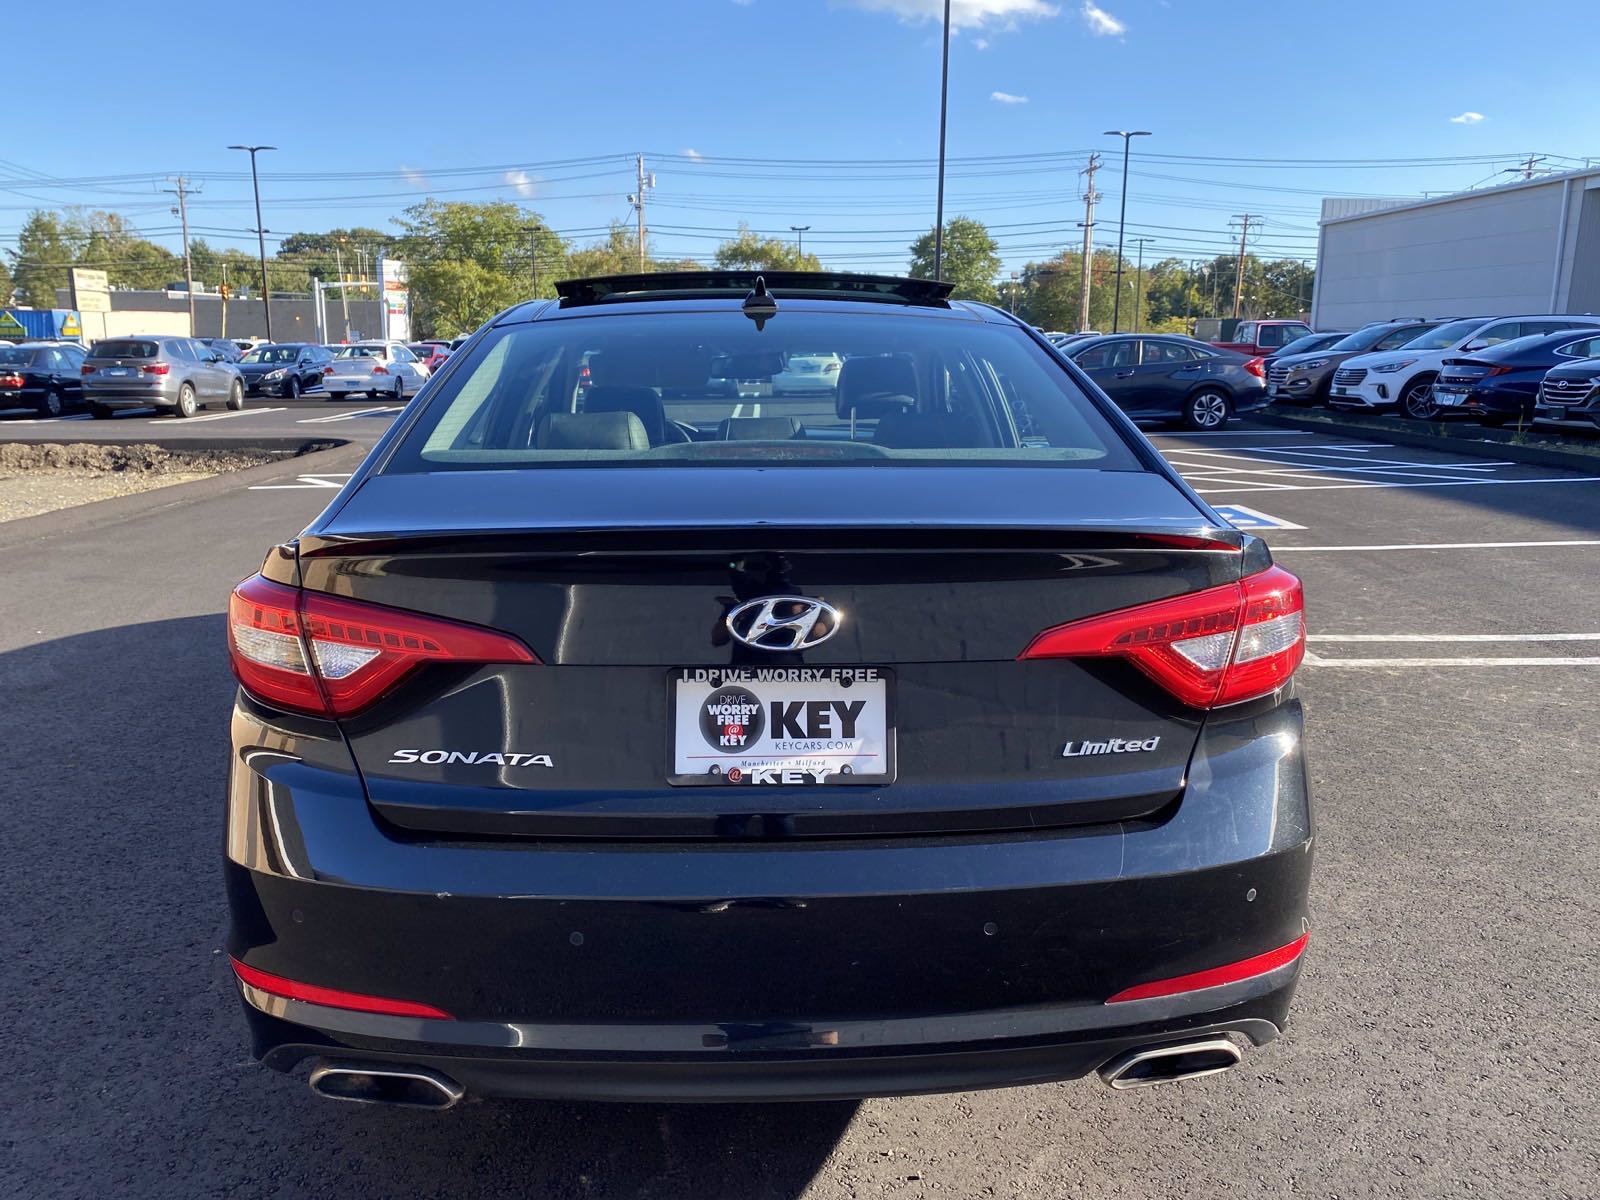 Certified Pre-Owned 2015 Hyundai Sonata 2.4L Limited 4dr Car in Vernon #M20680A | Key Hyundai of ...